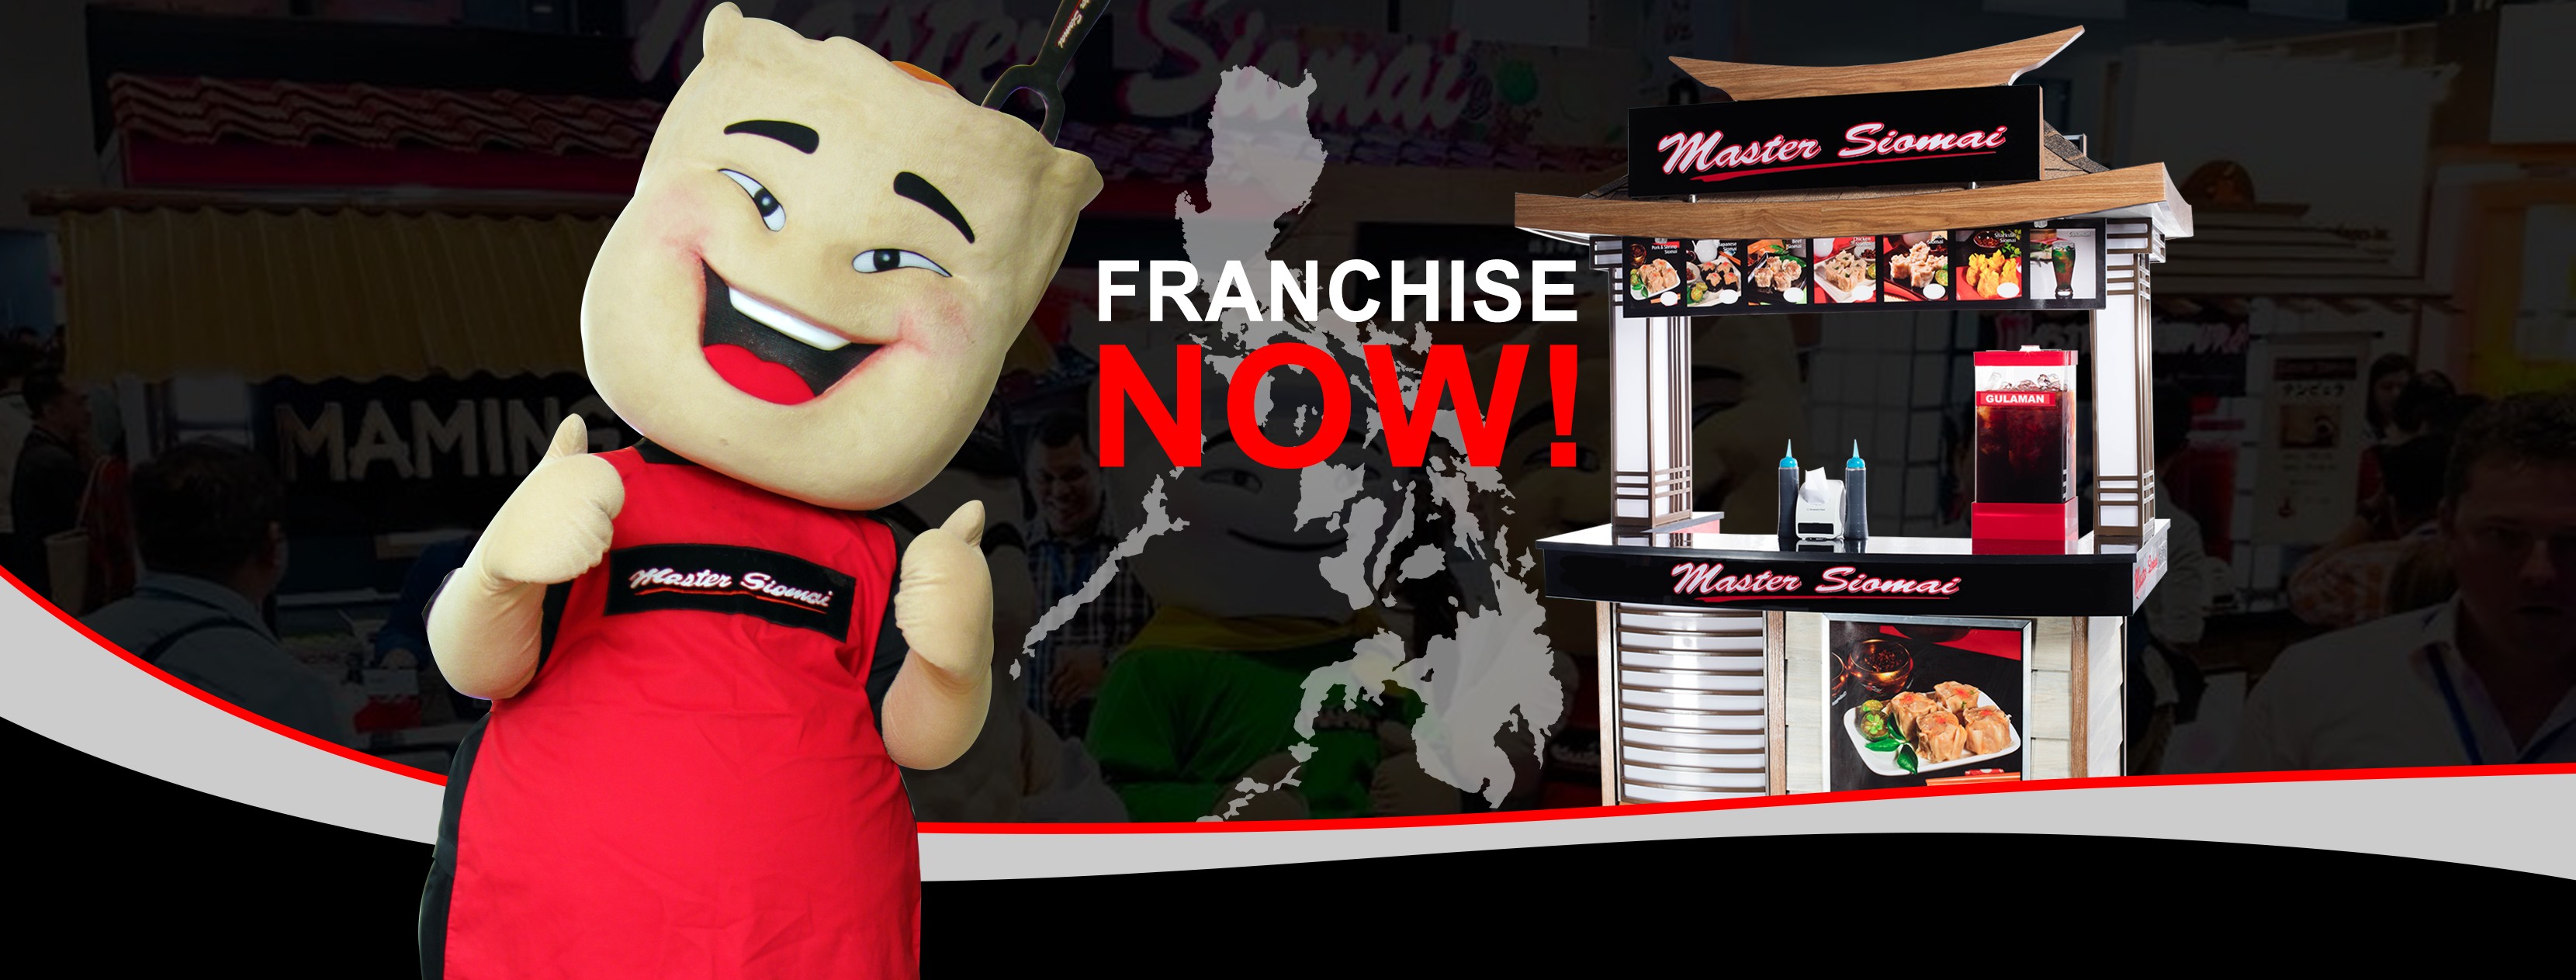 food franchise in the Philippines - master siomai